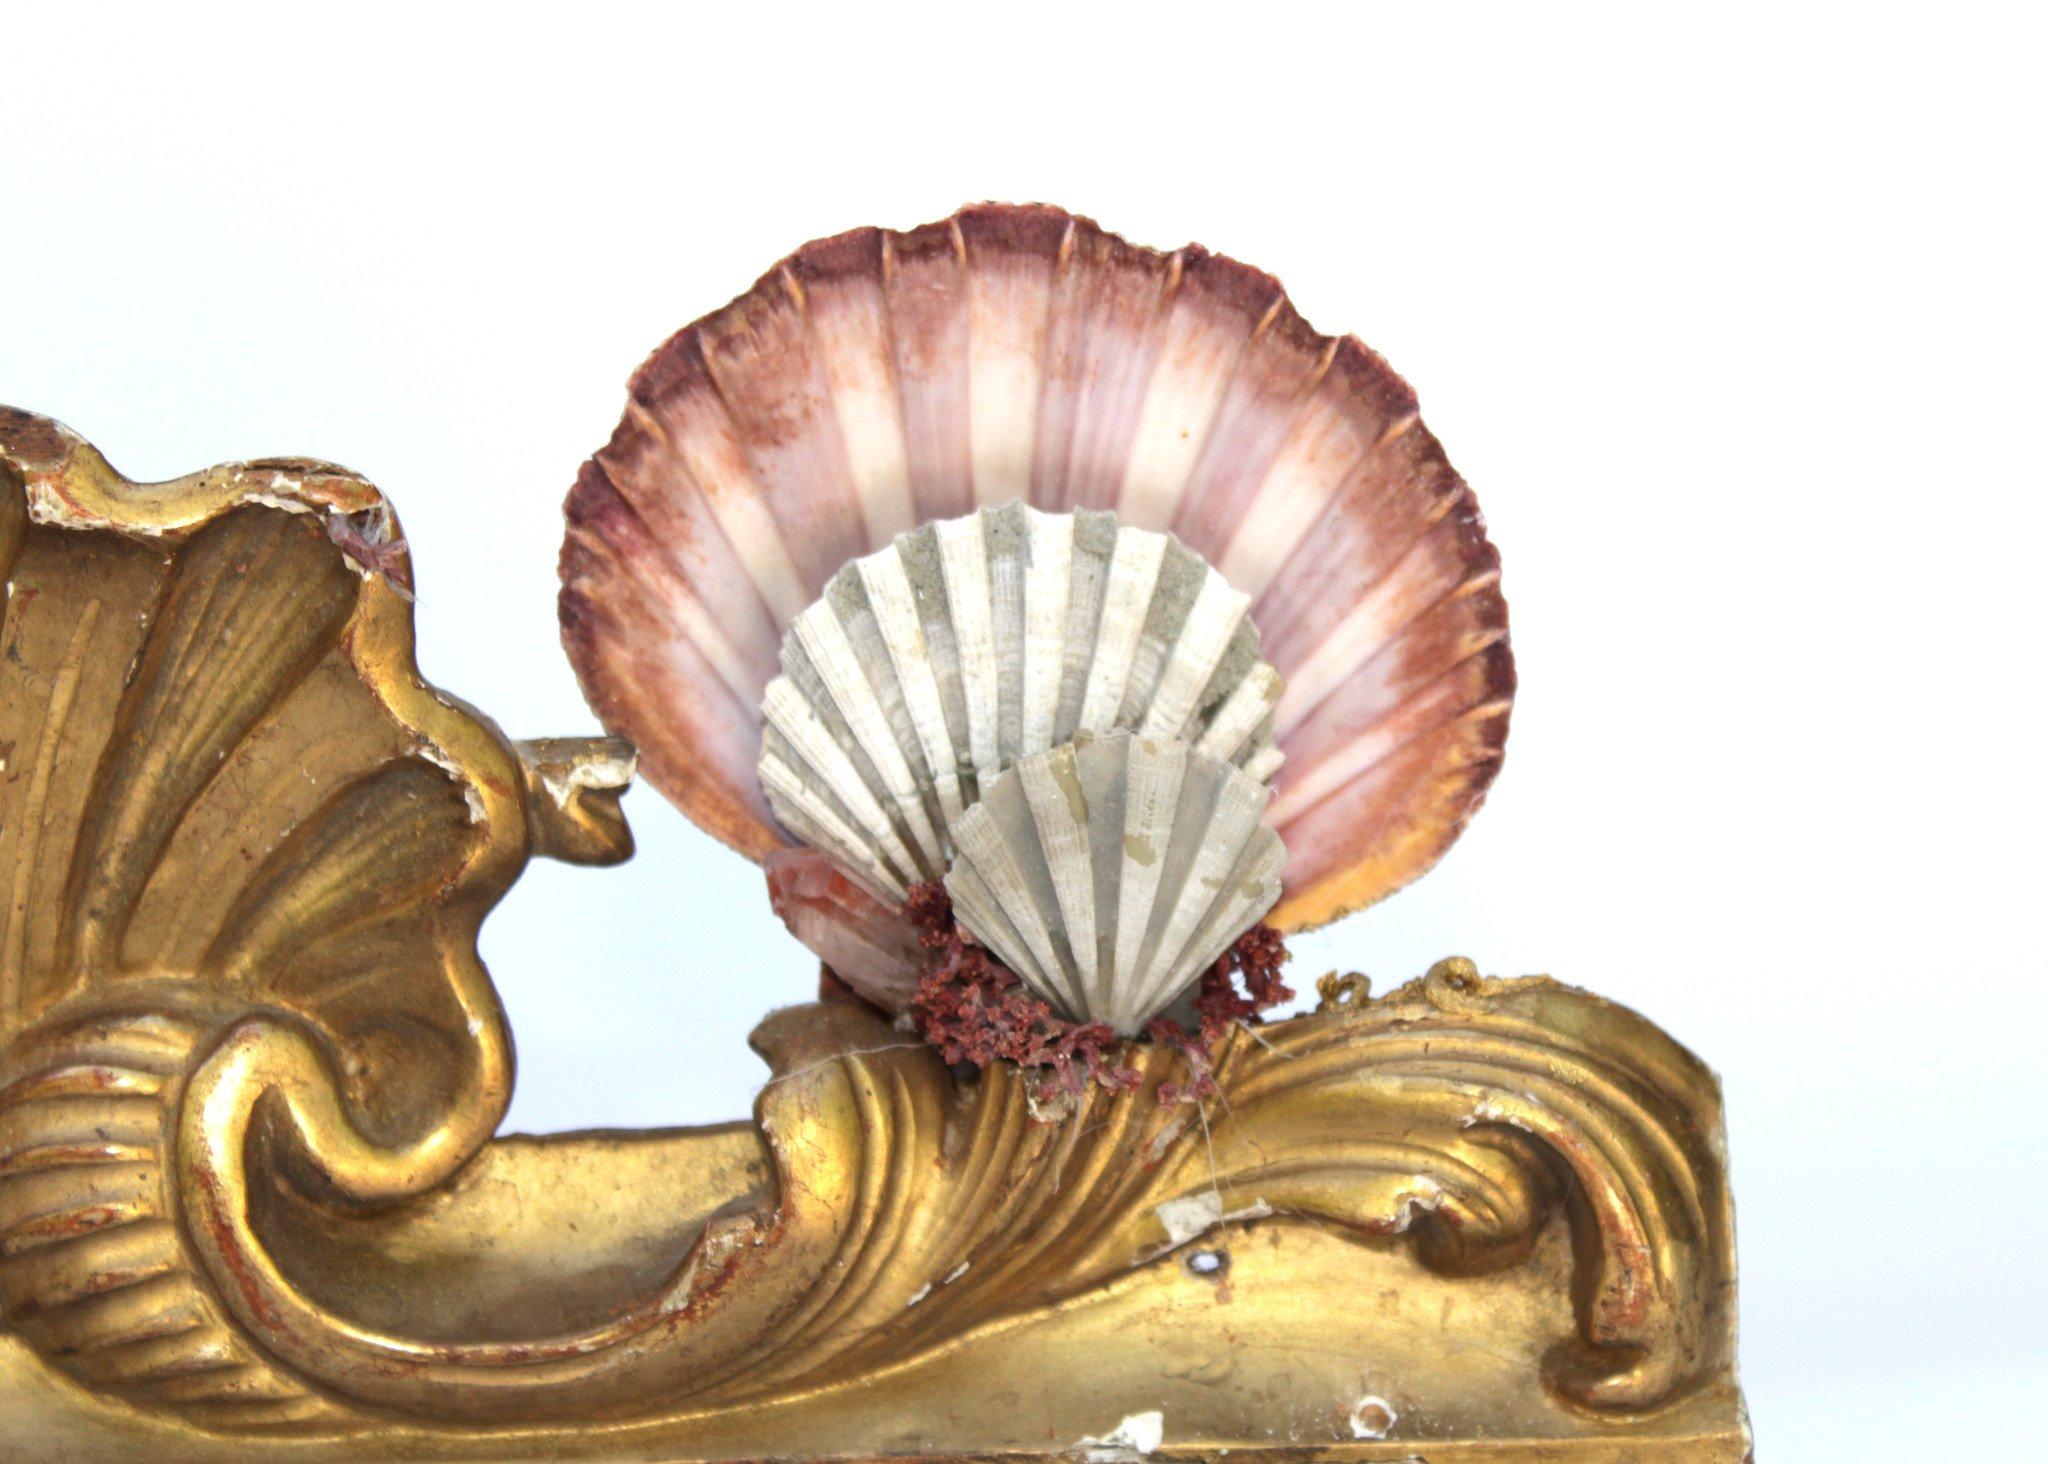 19th century Italian pediment fragment decorated with pectin shells and red phantom crystal points on a lucite base.

The piece is put together by Jean O'Reilly Barlow, the artist and creative director of Interi. The date of manufacture reflects